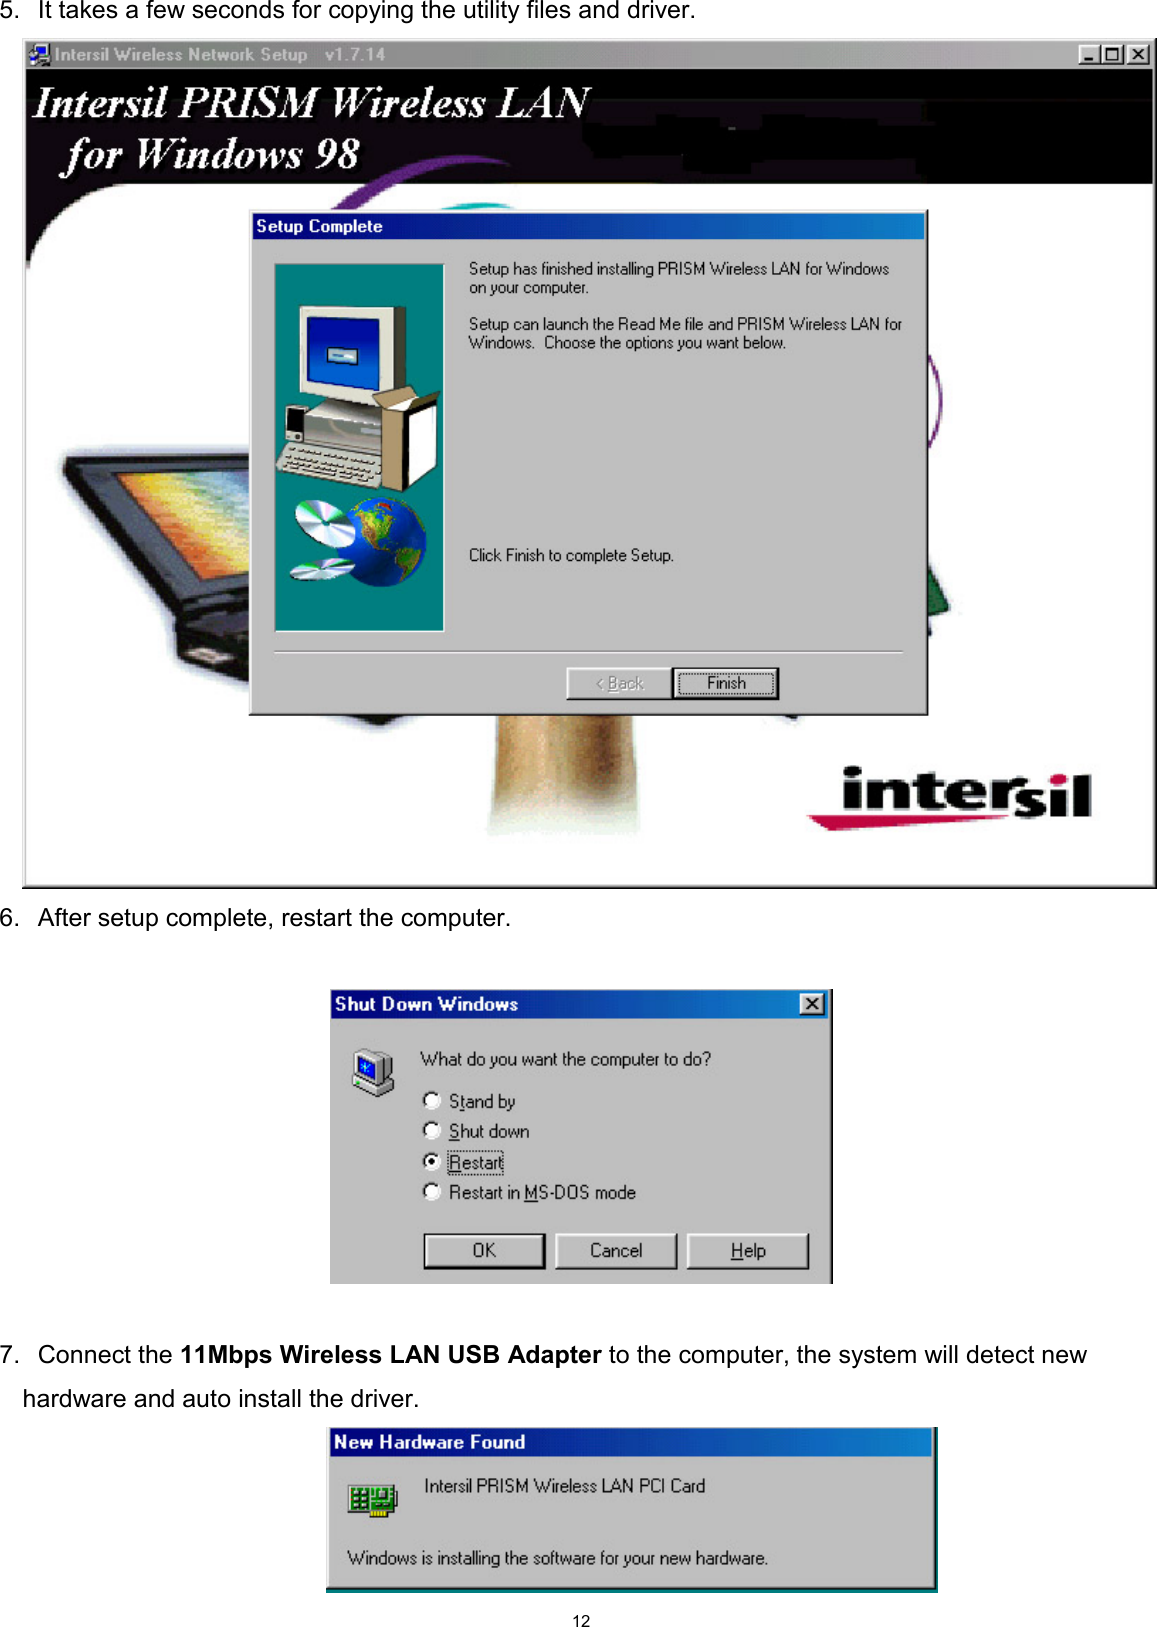 125.  It takes a few seconds for copying the utility files and driver.6.  After setup complete, restart the computer.  7. Connect the 11Mbps Wireless LAN USB Adapter to the computer, the system will detect newhardware and auto install the driver.                                               